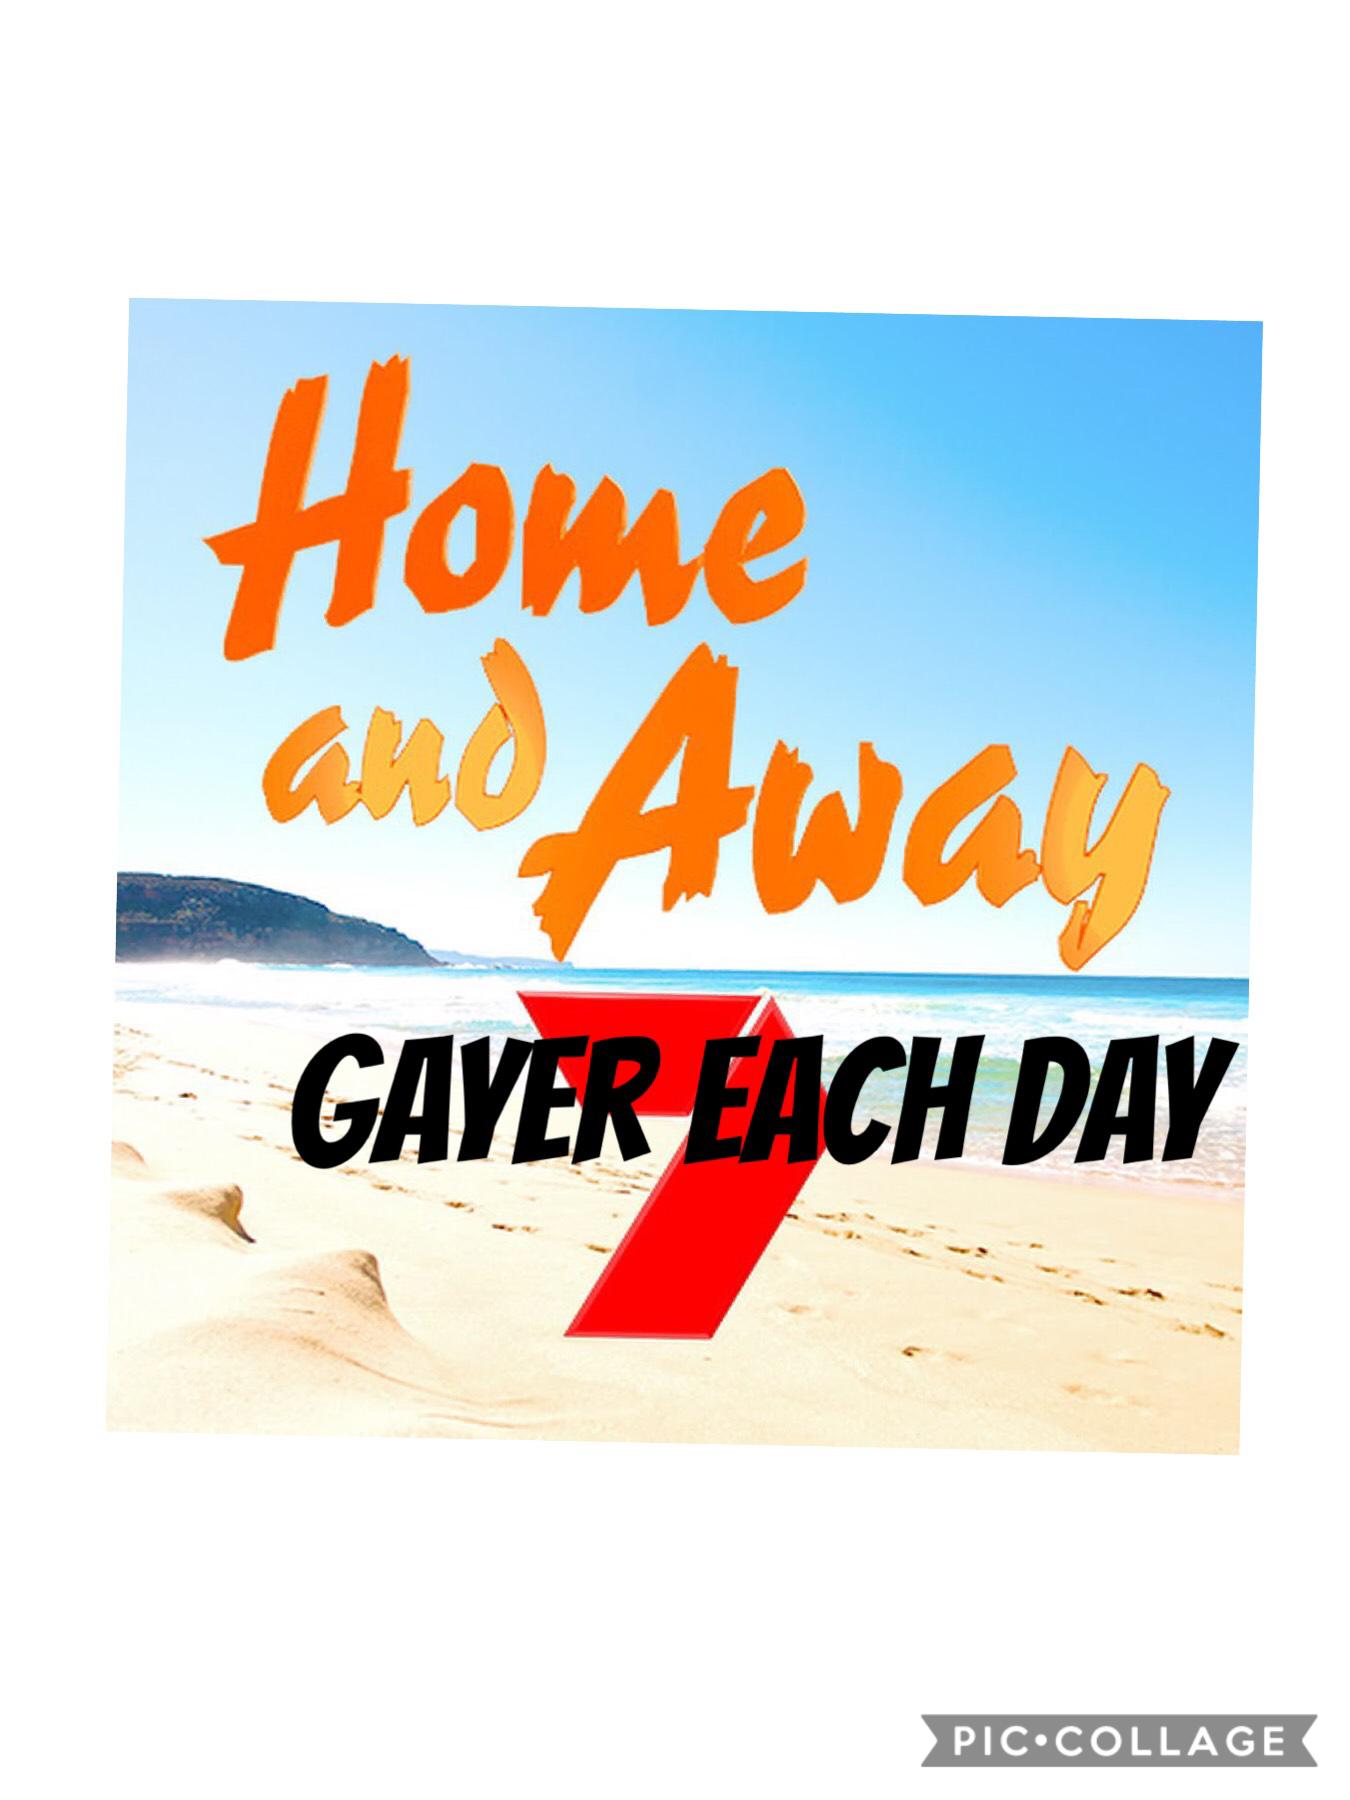 Home and away rime /is not gay